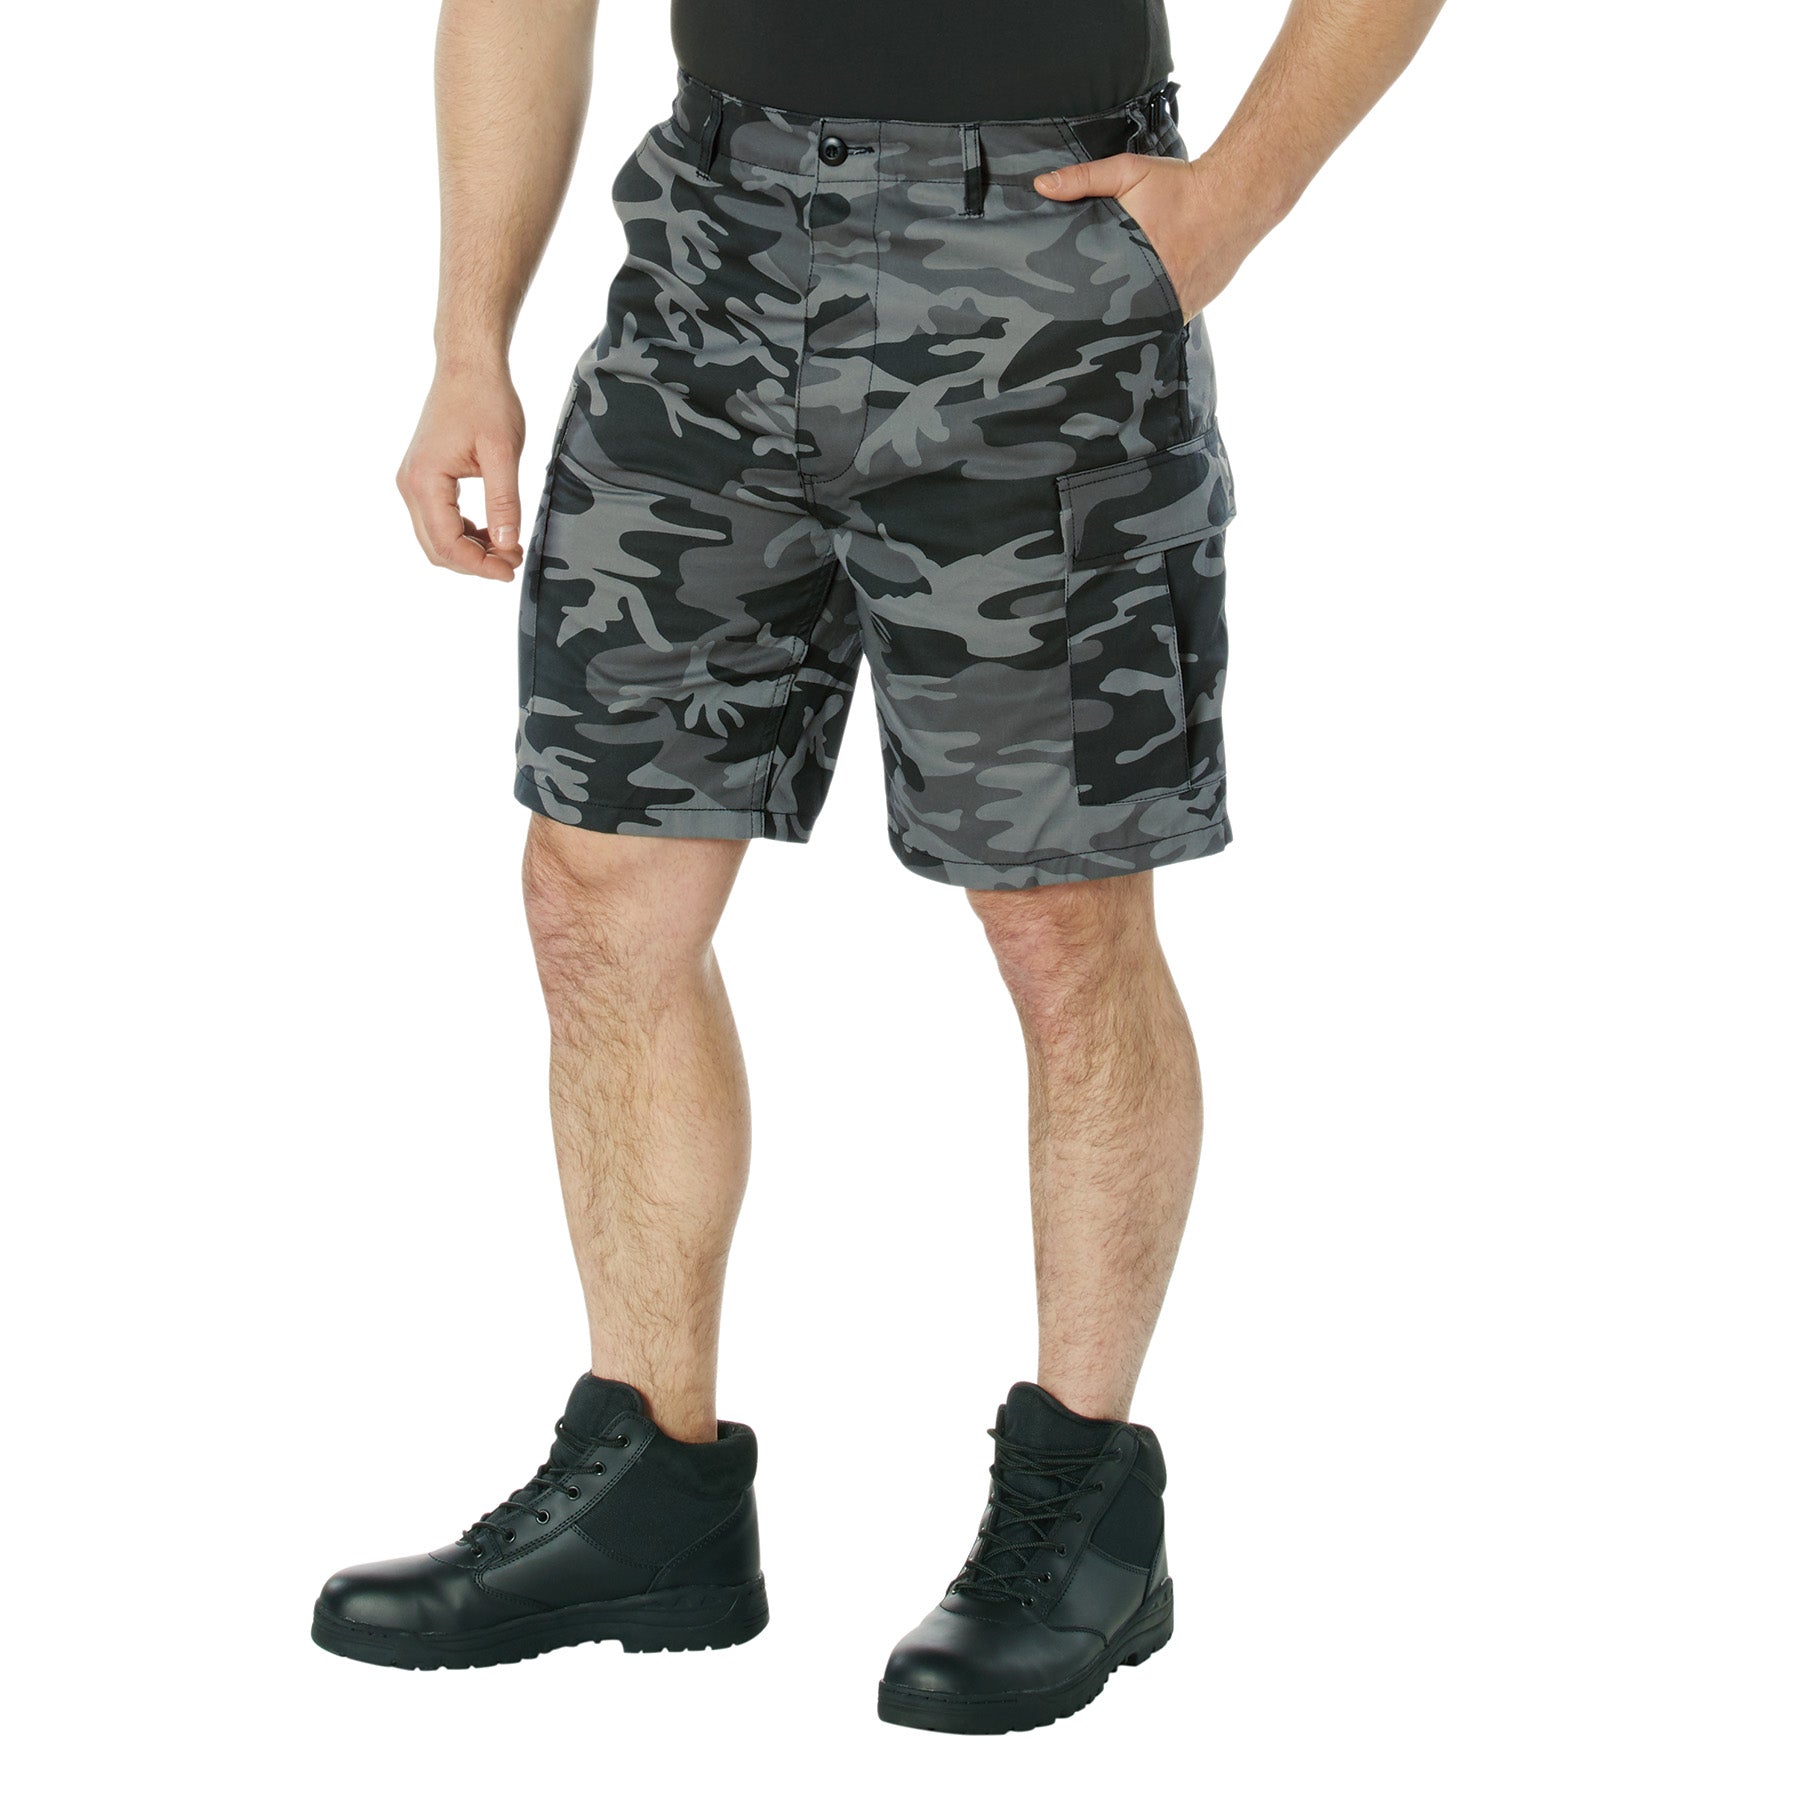 Tailored Camouflage Cotton Shorts